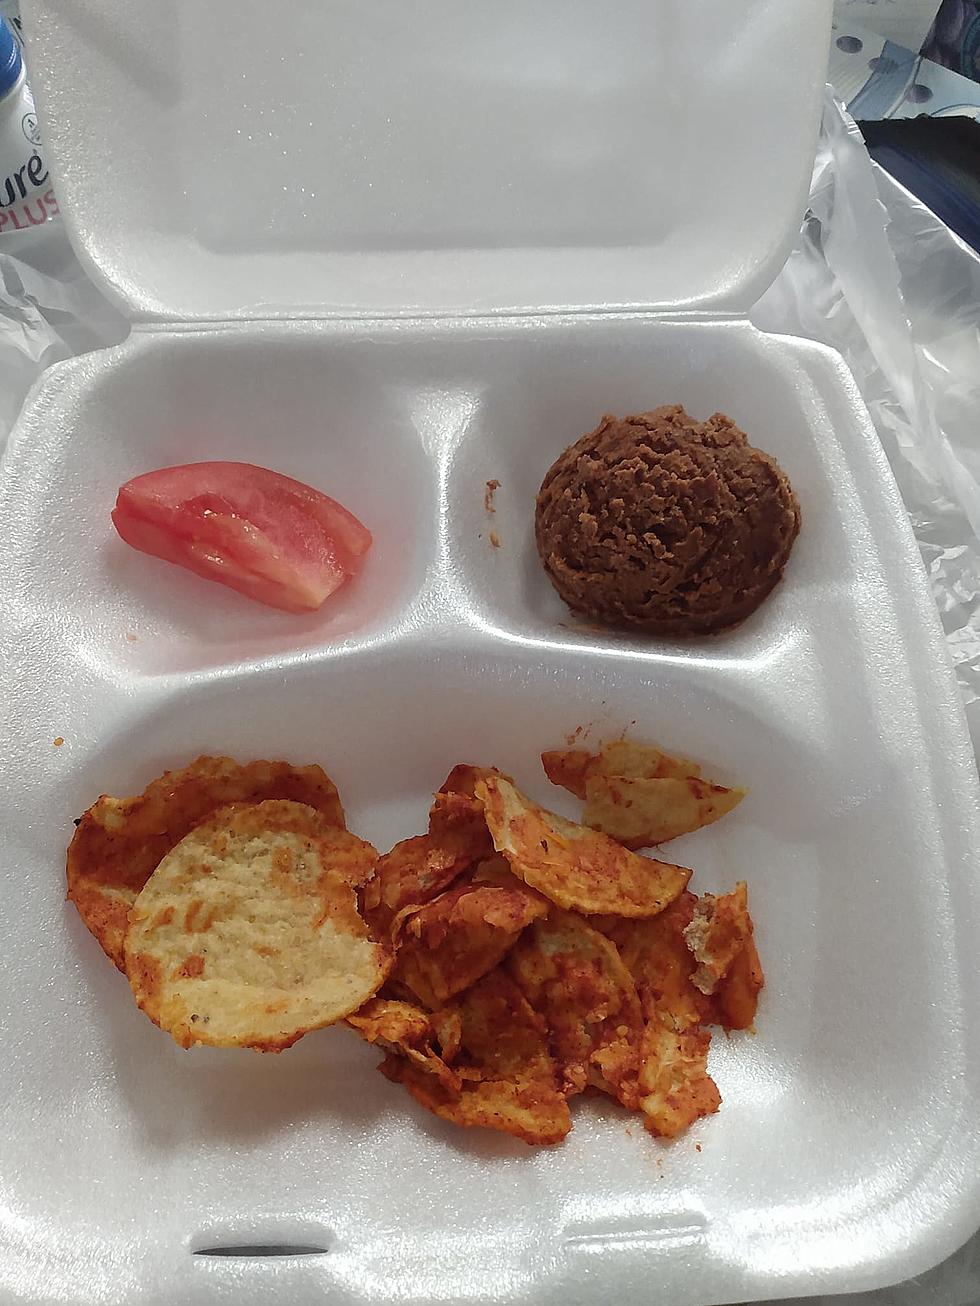 Clint ISD Lunch Shamed Responds To Viral Nachos Photo